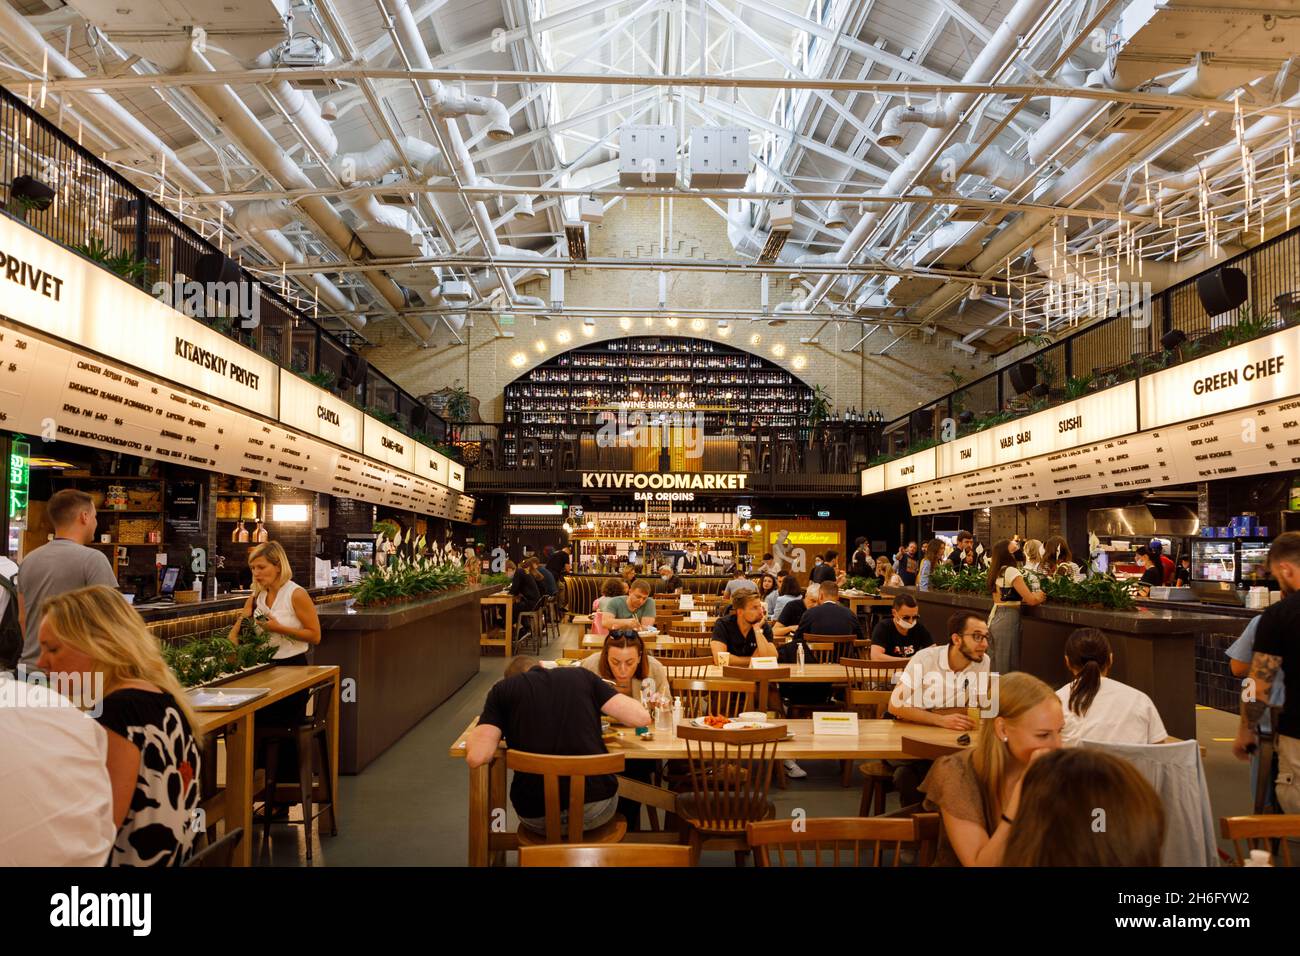 Kyiv, Ukraine - August 20 2021: Kyiv Food Market - 22 restaurants under one roof in the former building of the Arsenal plant Stock Photo